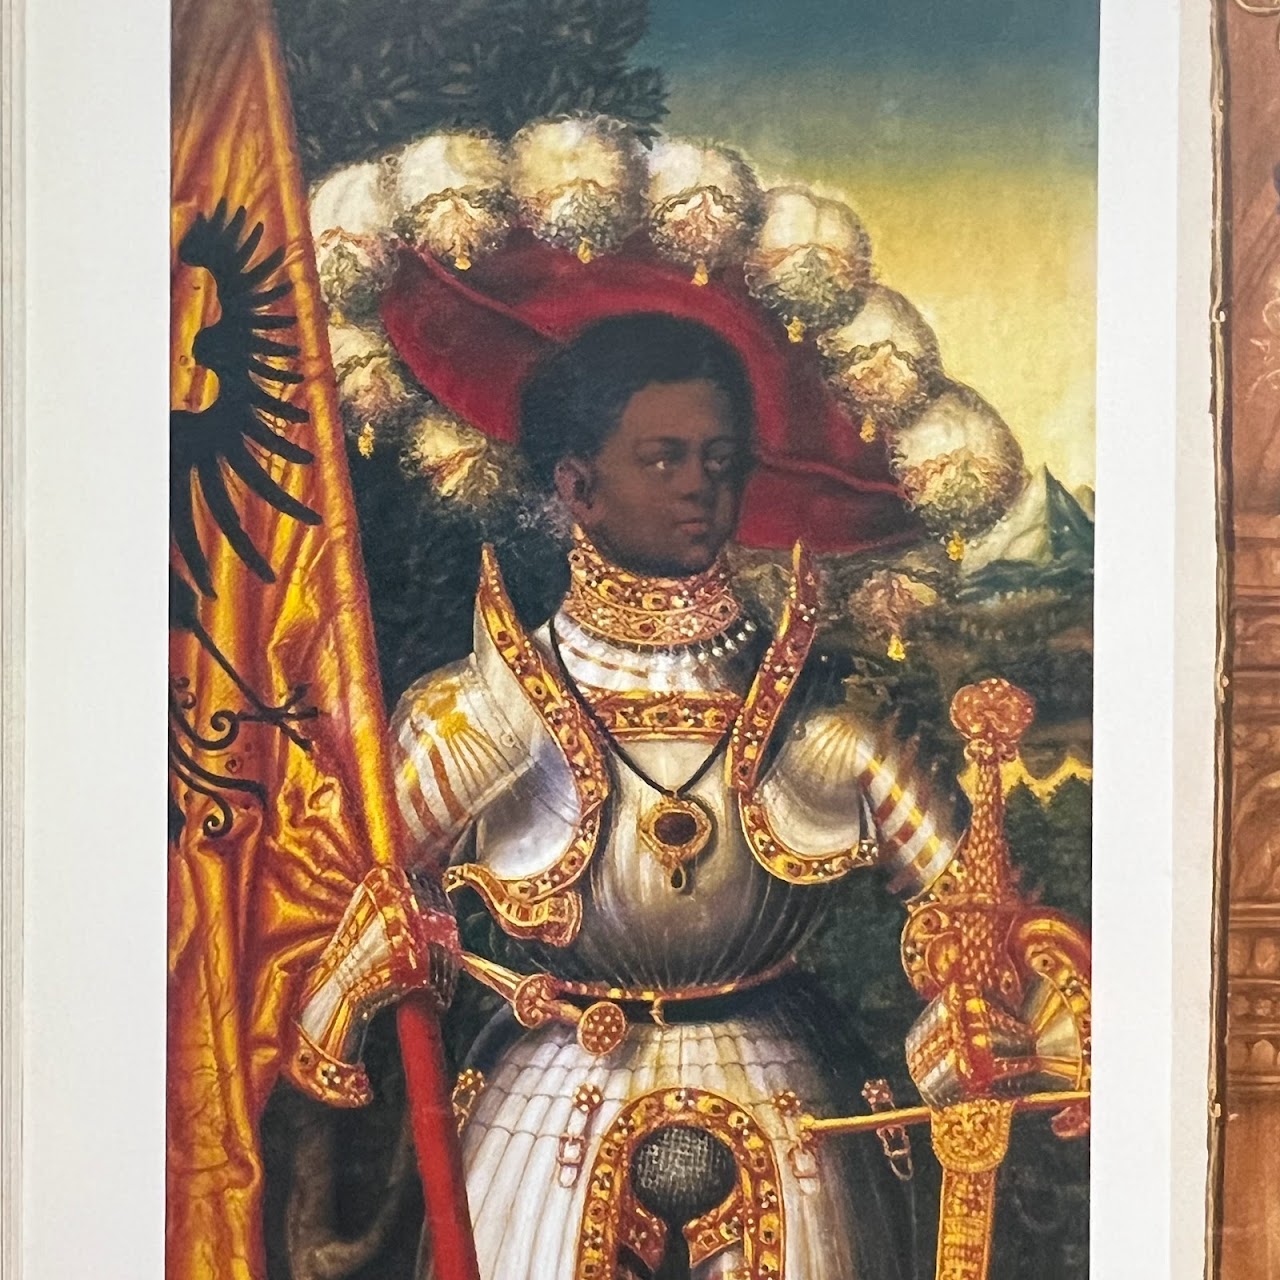 The Image Of The Black In Western Art New Edition